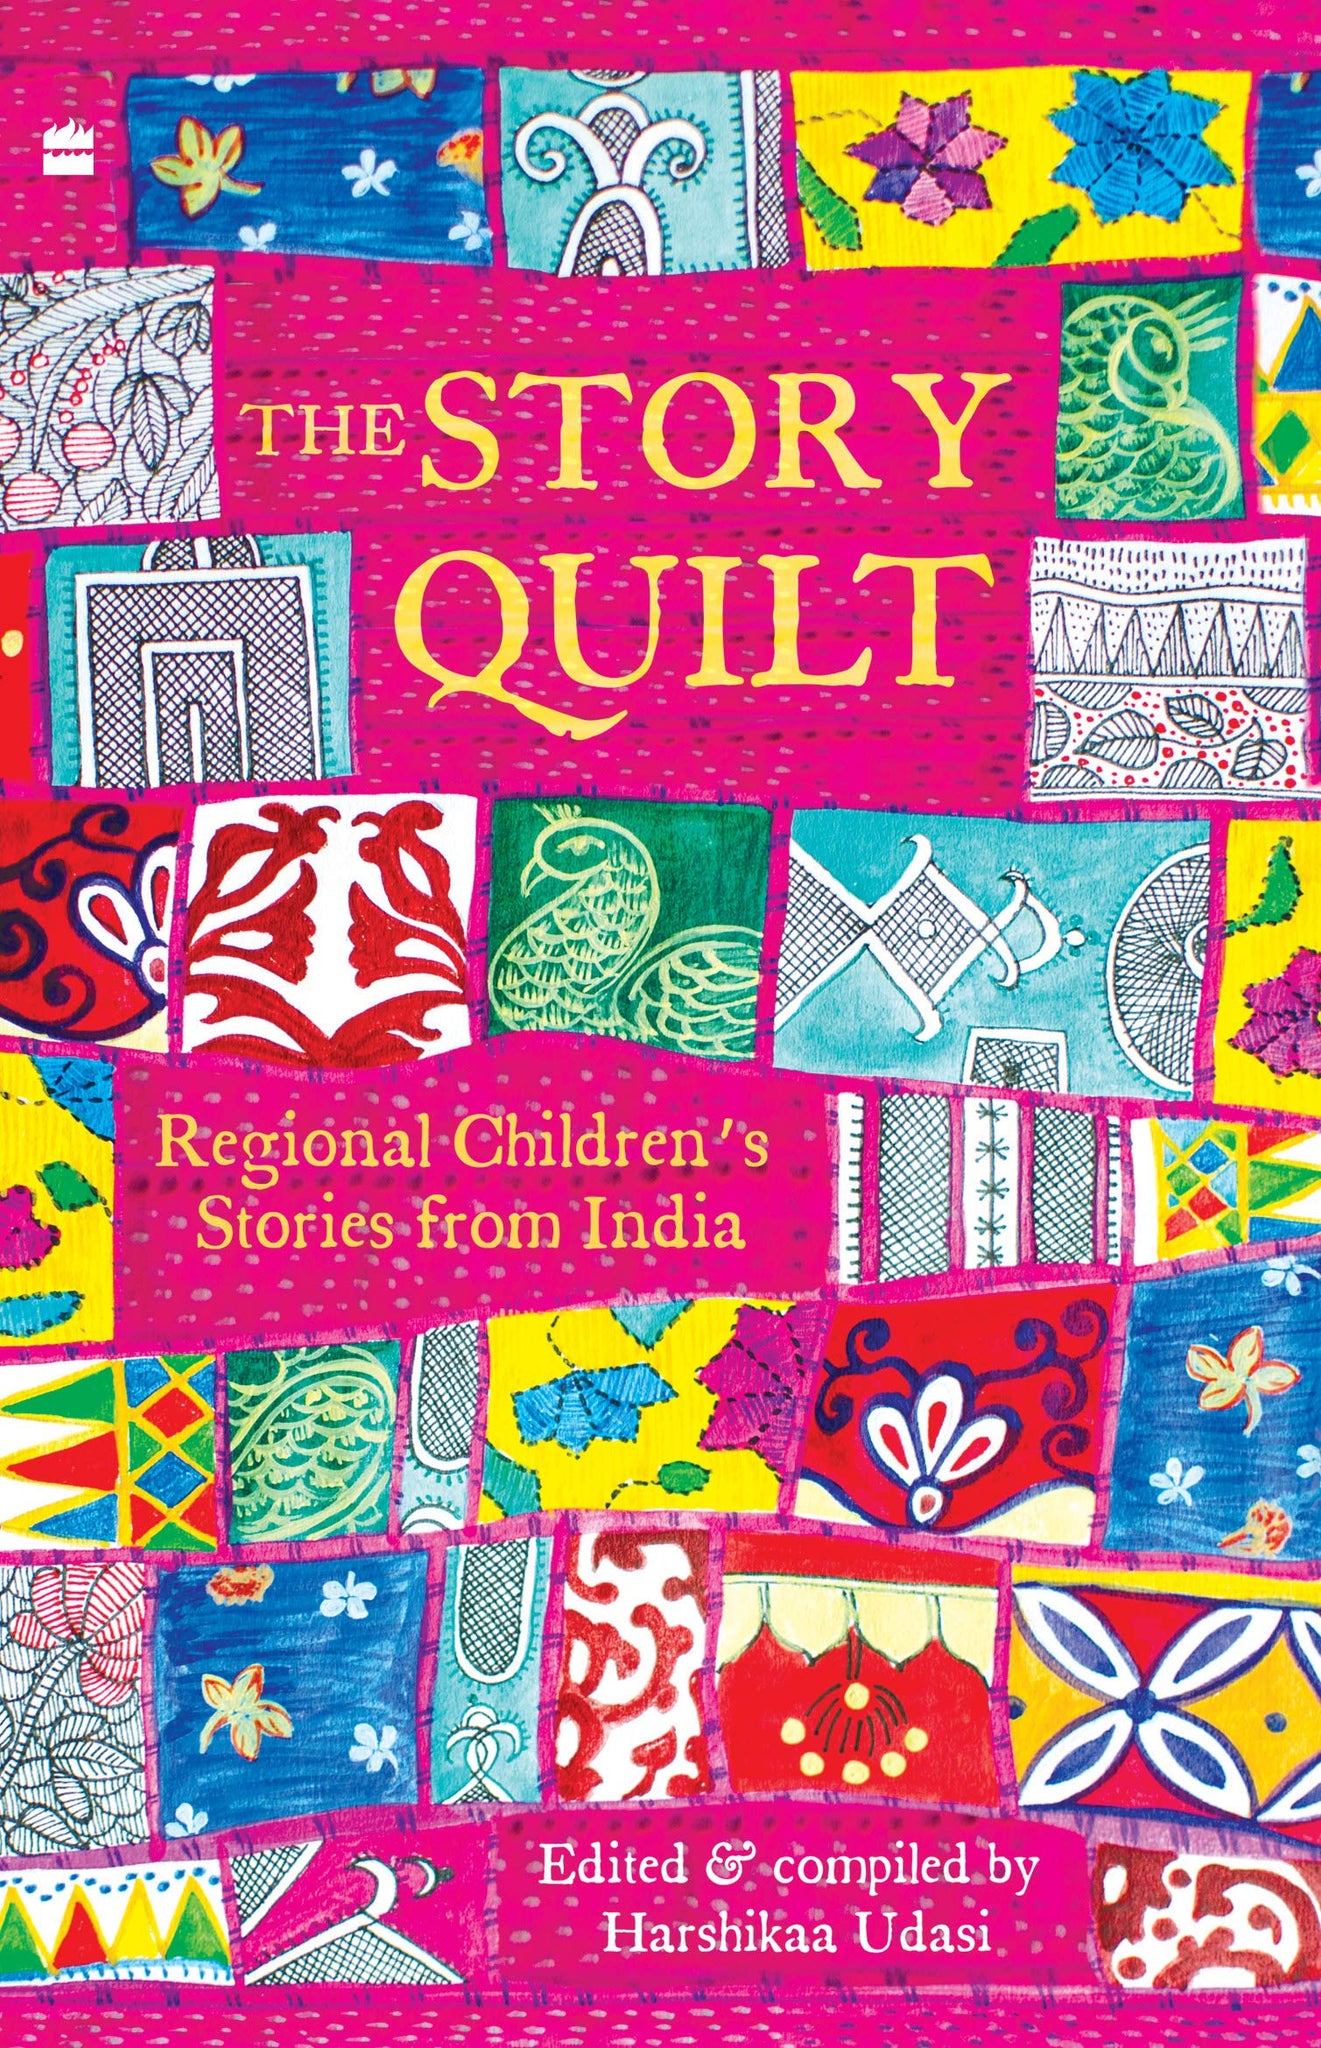 The Story Quilt: Regional Children's Stories From India